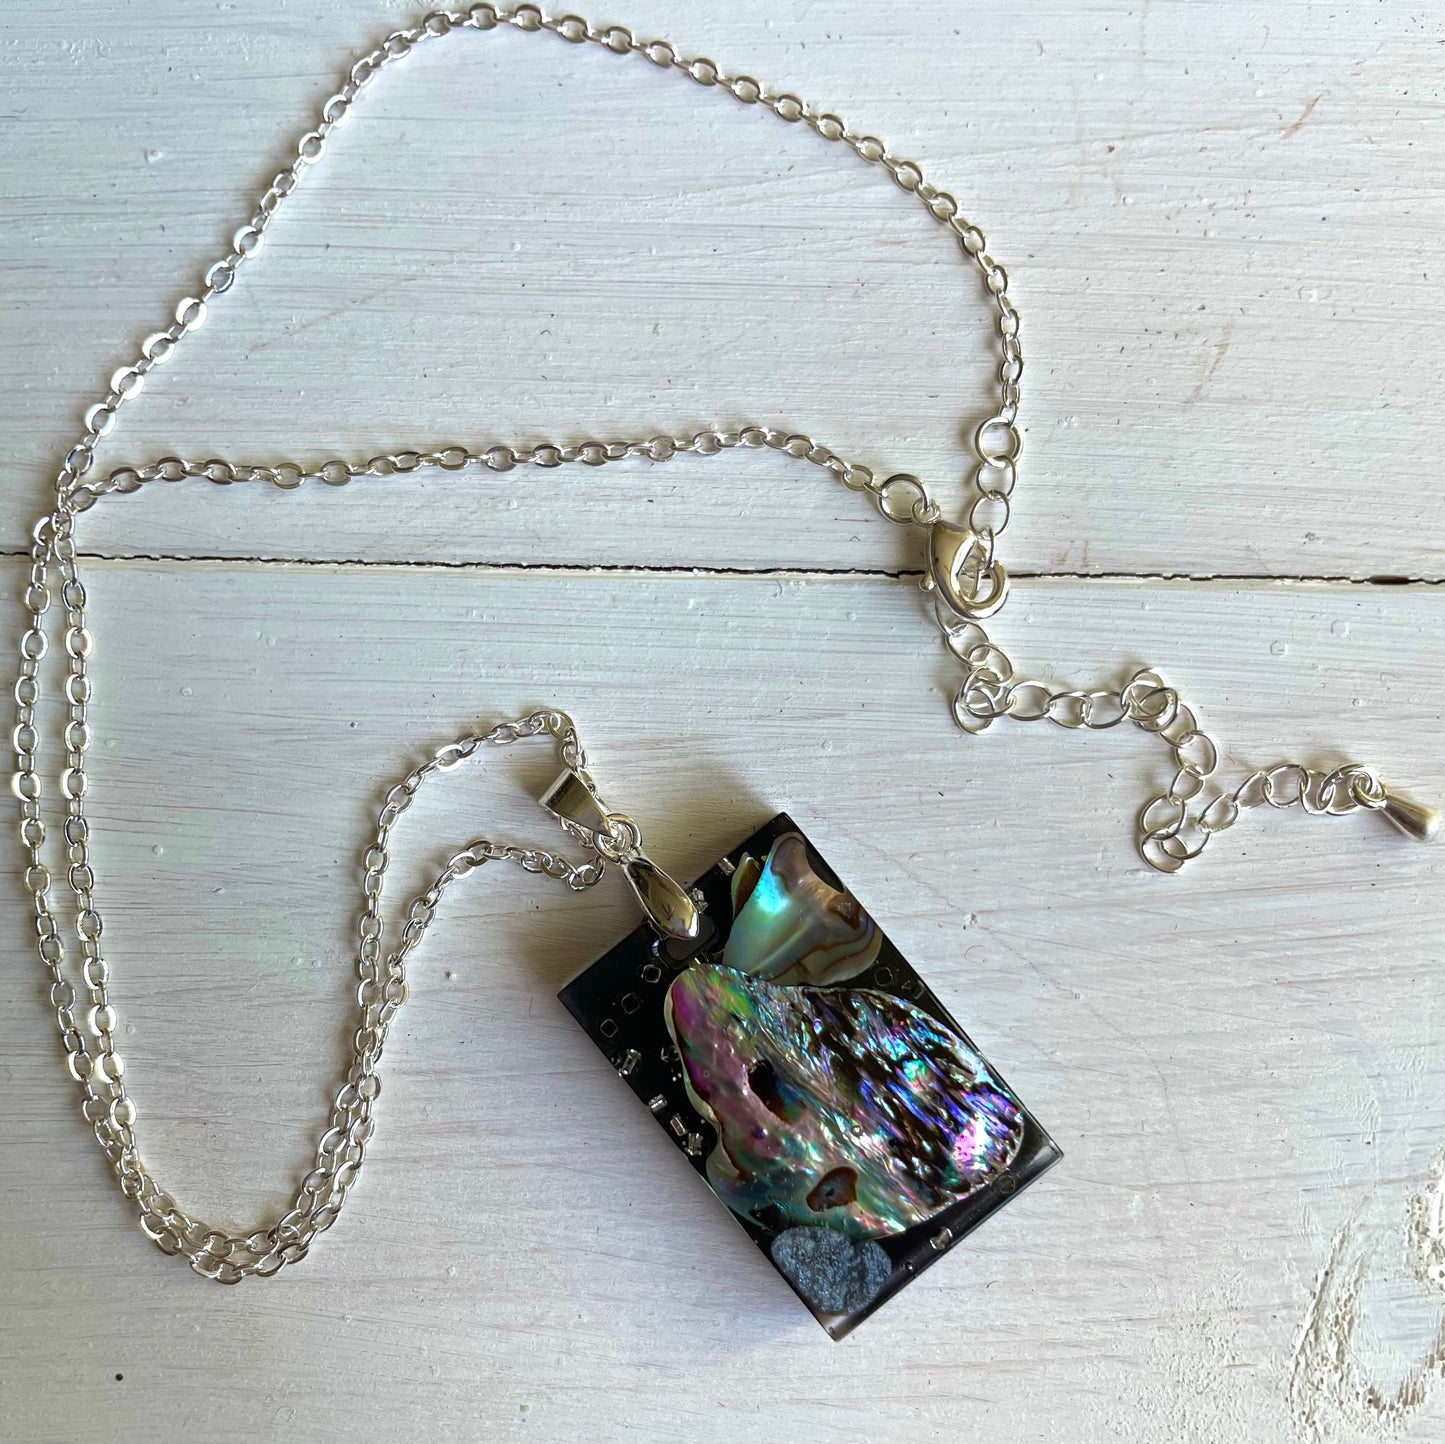 Abalone necklace and pendant